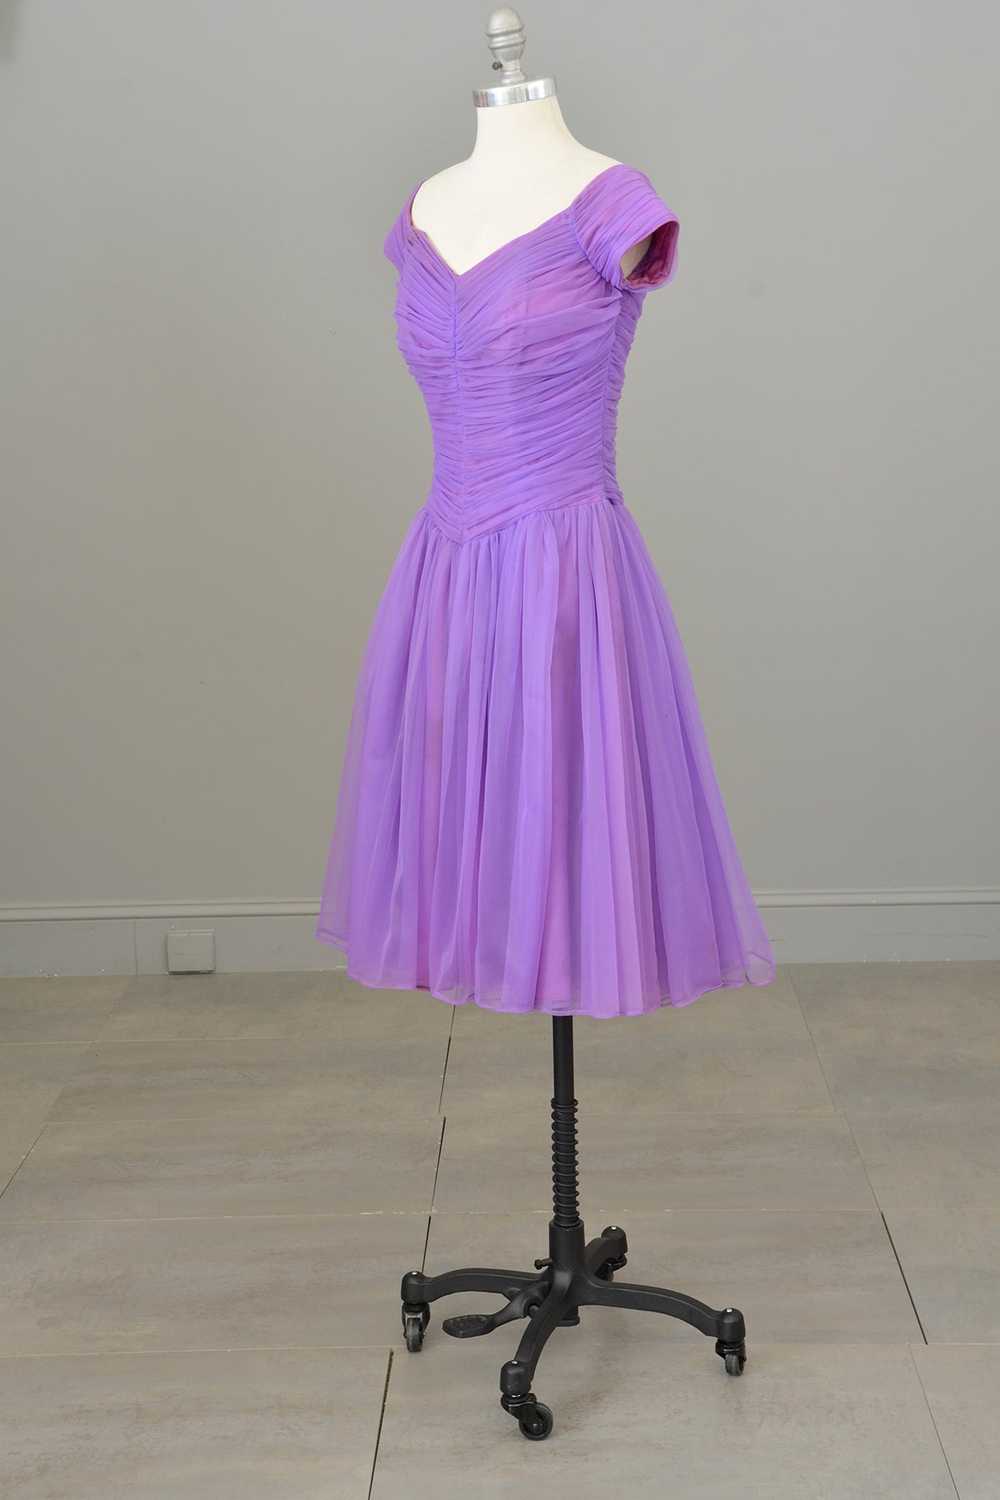 1960s 70s Vibrant Purple Ruched Party Dress - image 5